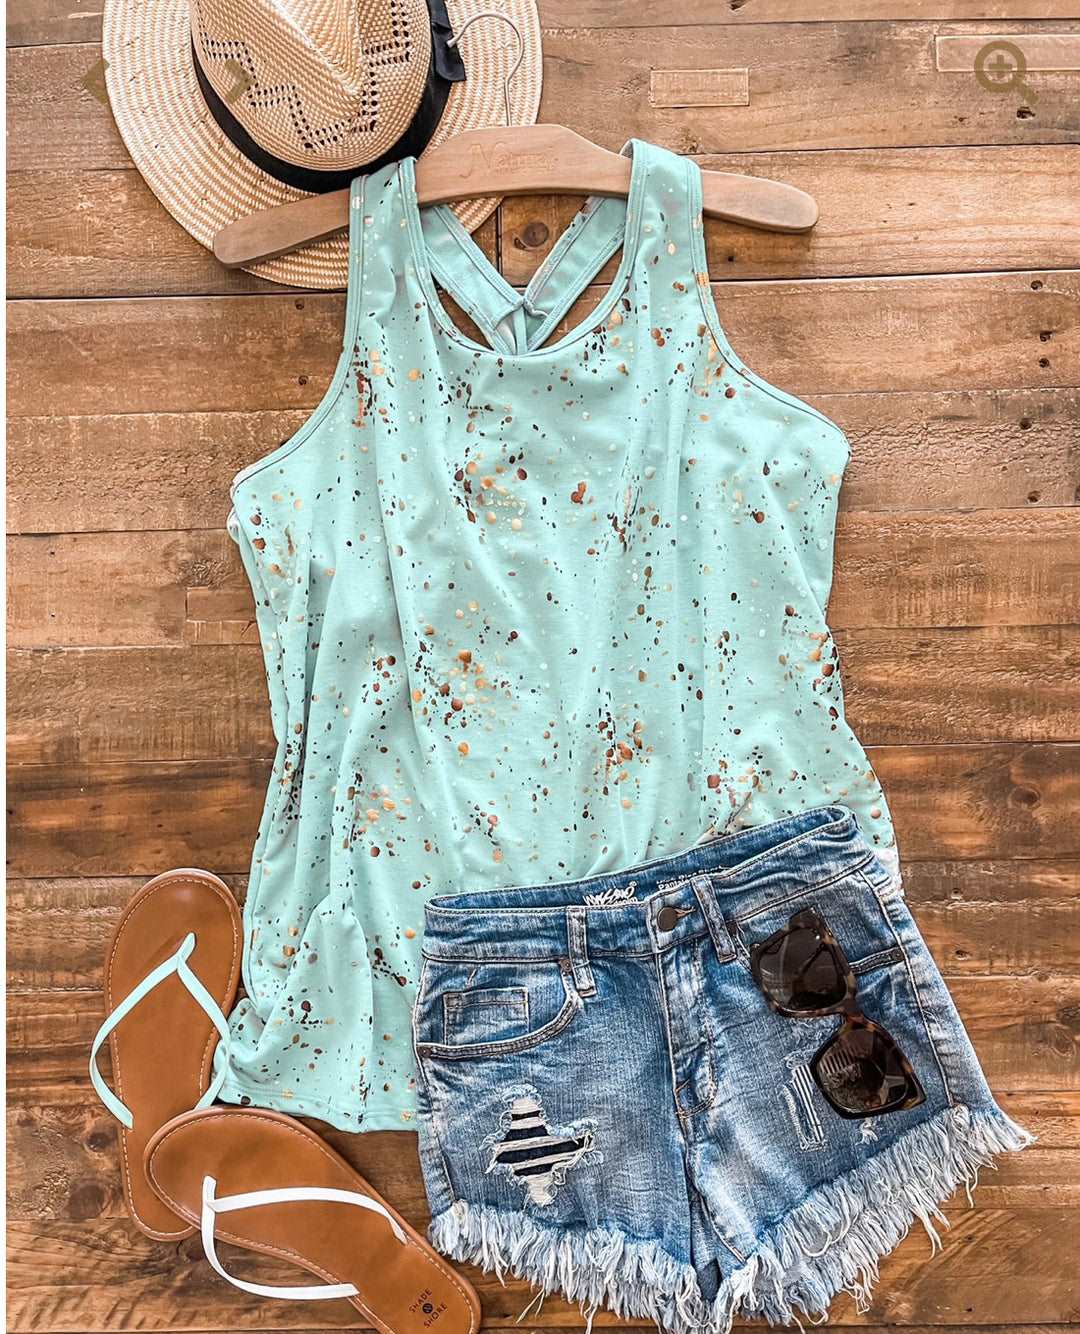 Mint colored tank top with gold splatter.